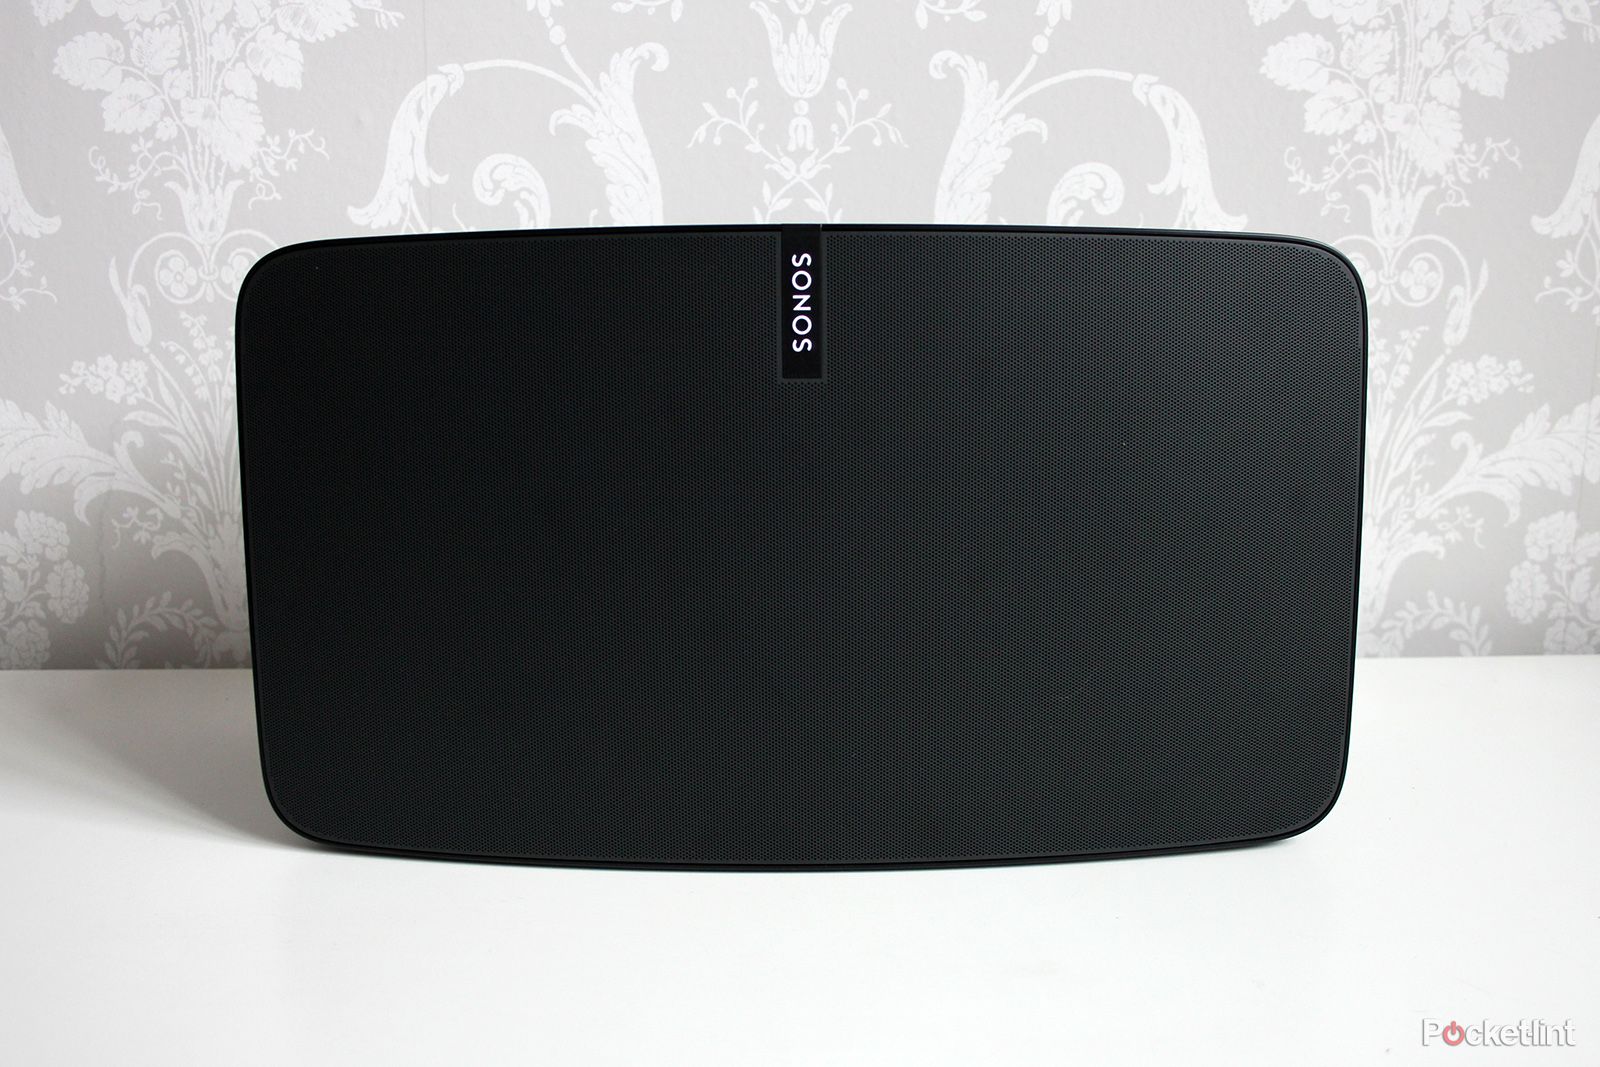 Sonos Speakers With Built-in Voice Control Coming Soon image 1